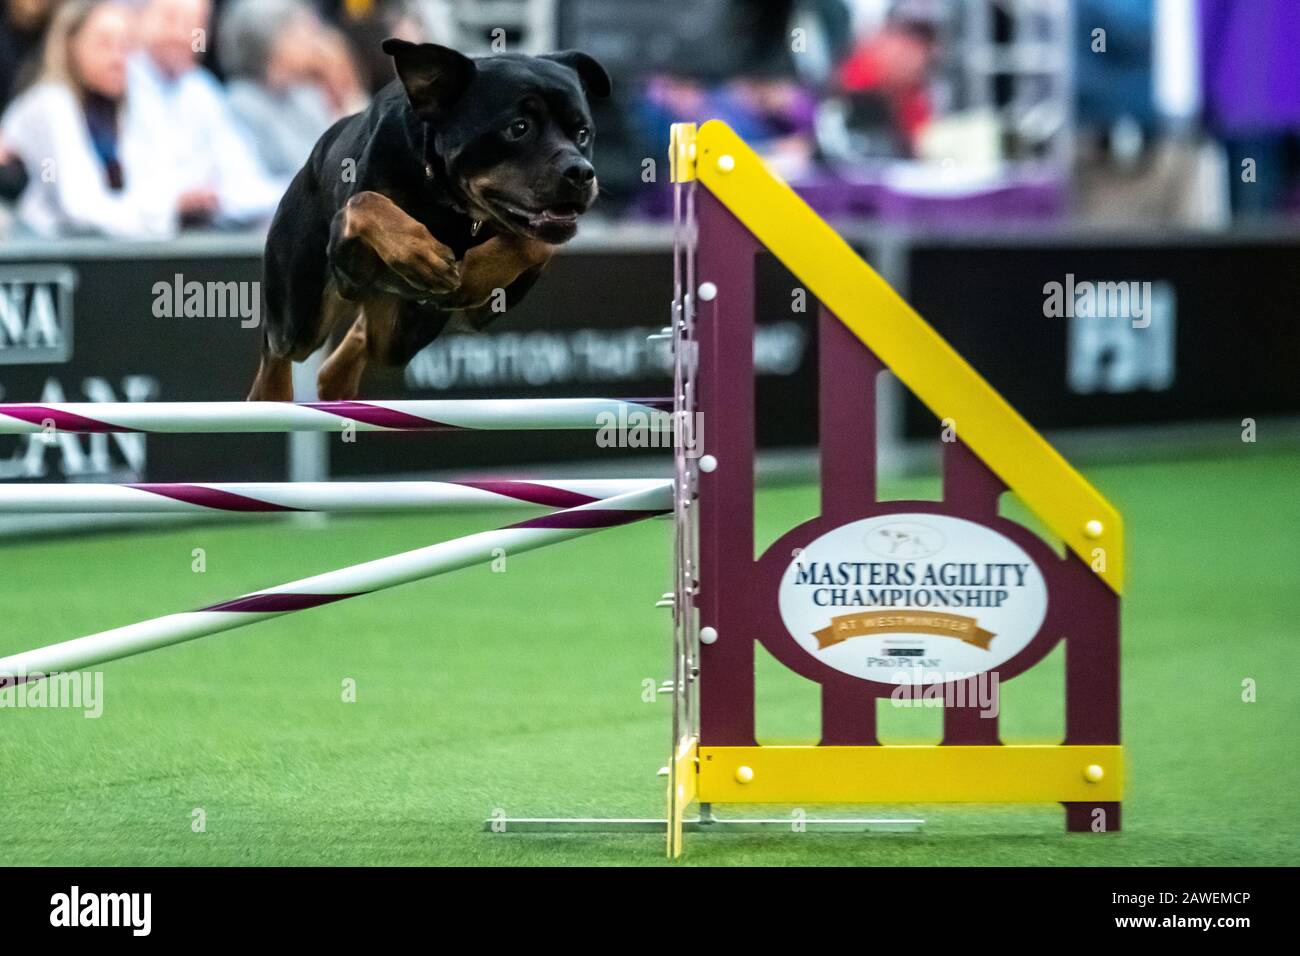 New York, USA. 8th Feb, 2020. Garnet, a Rottweiler, clears an obstacle during the qualifying round of The Westminster Kennel Club Dog show Masters Agility Championship in New York city. Credit: Enrique Shore/Alamy Live News Stock Photo